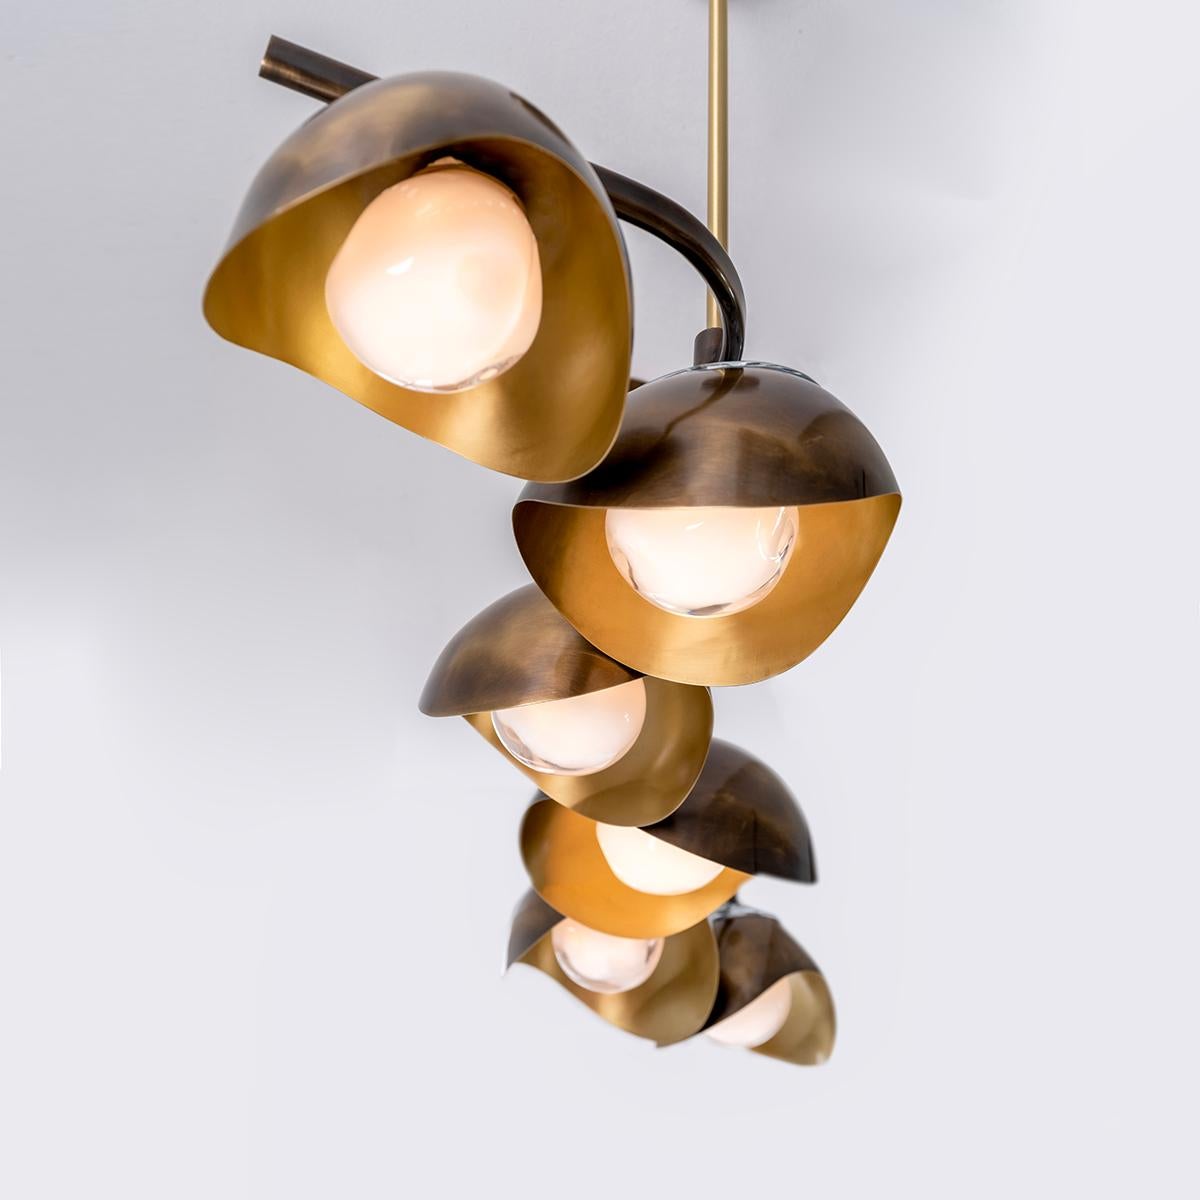 Italian Serpente Ceiling Light by Gaspare Asaro- Bronze and Satin Brass Finish For Sale